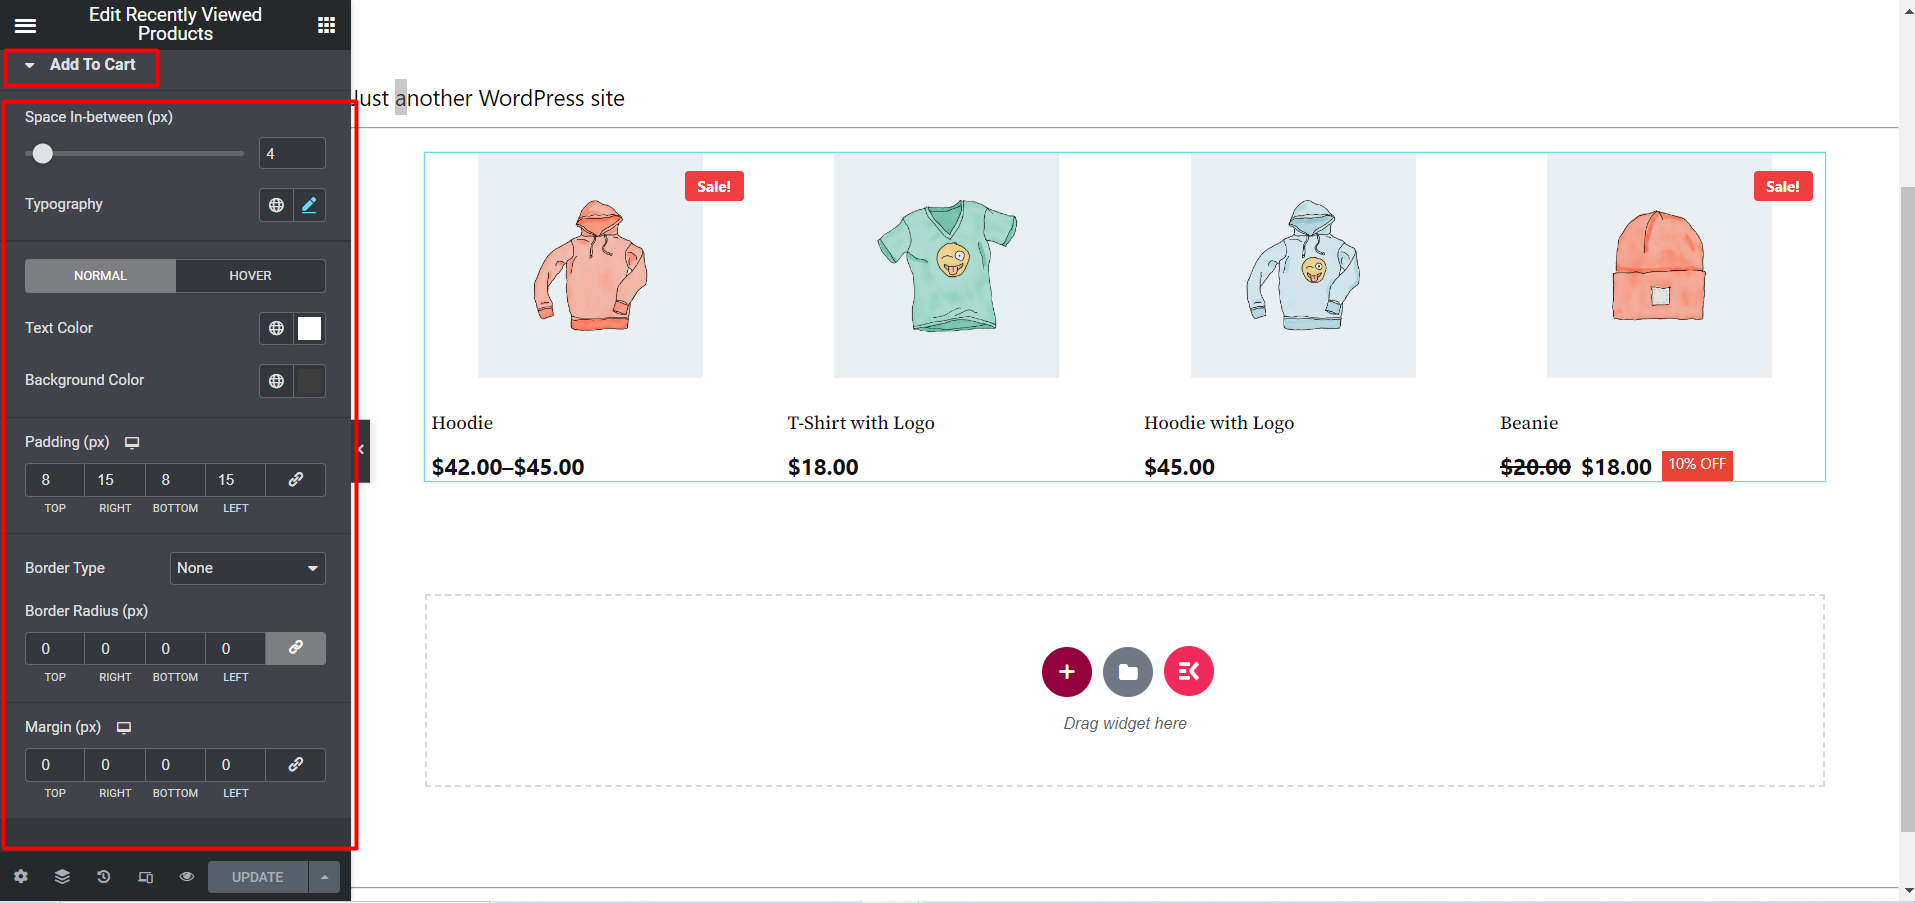 Recently Viewed Products widget helps Website visitors to find their selected product easily.